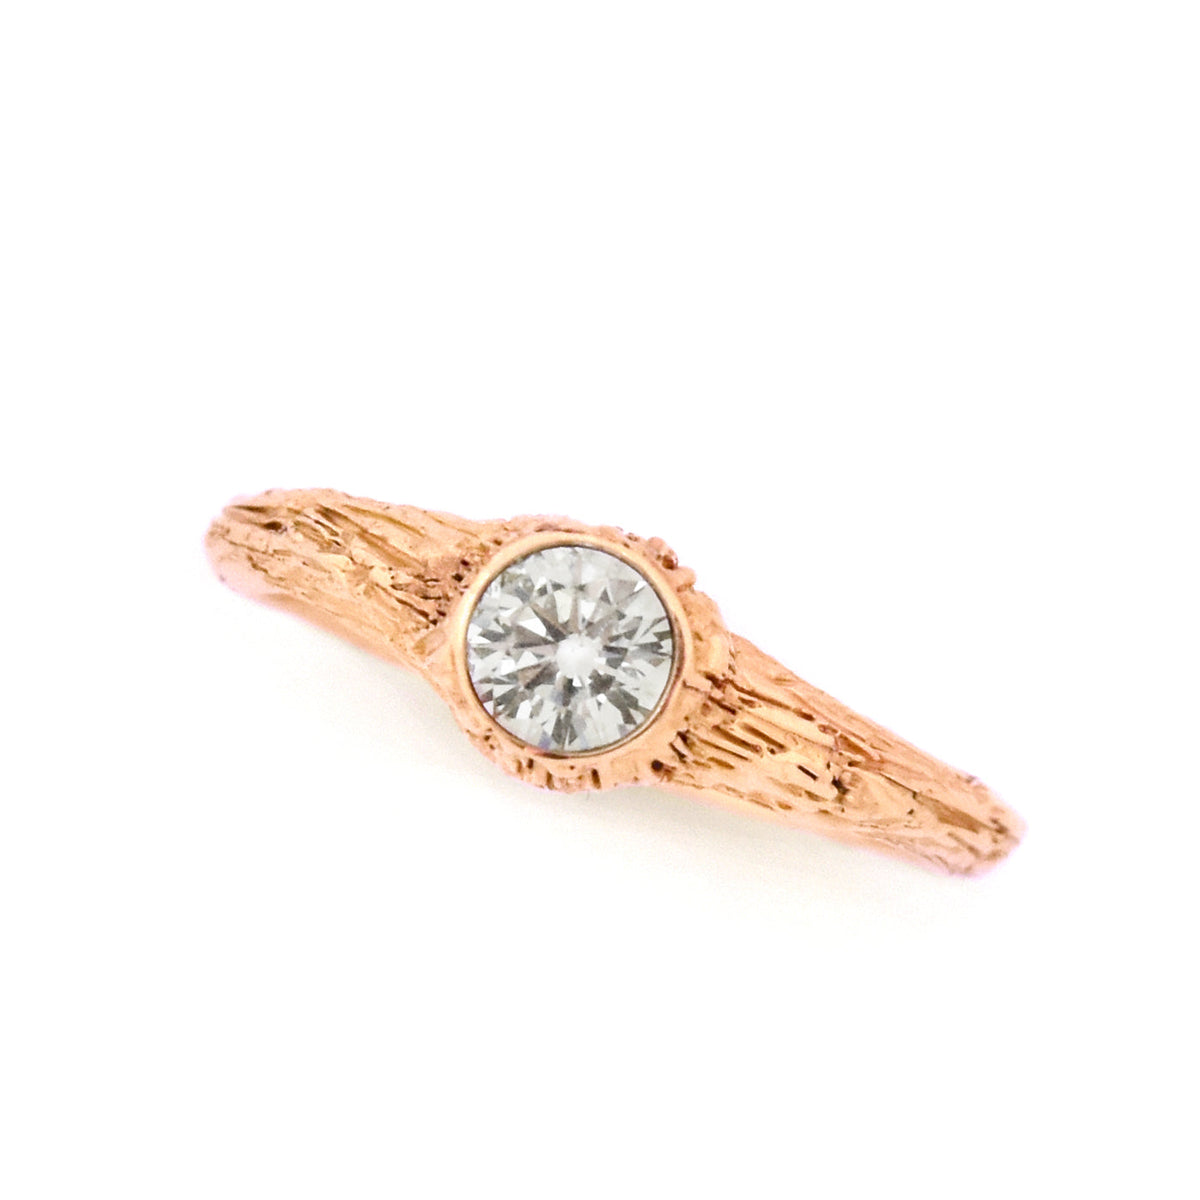 Gold Heartwood Diamond Ring - your choice of 5mm stone & gold - Wedding Ring Recycled Diamond / 14K Rose Gold Conflict Free Diamond / 14K Rose Gold 6324 - handmade by Beth Millner Jewelry